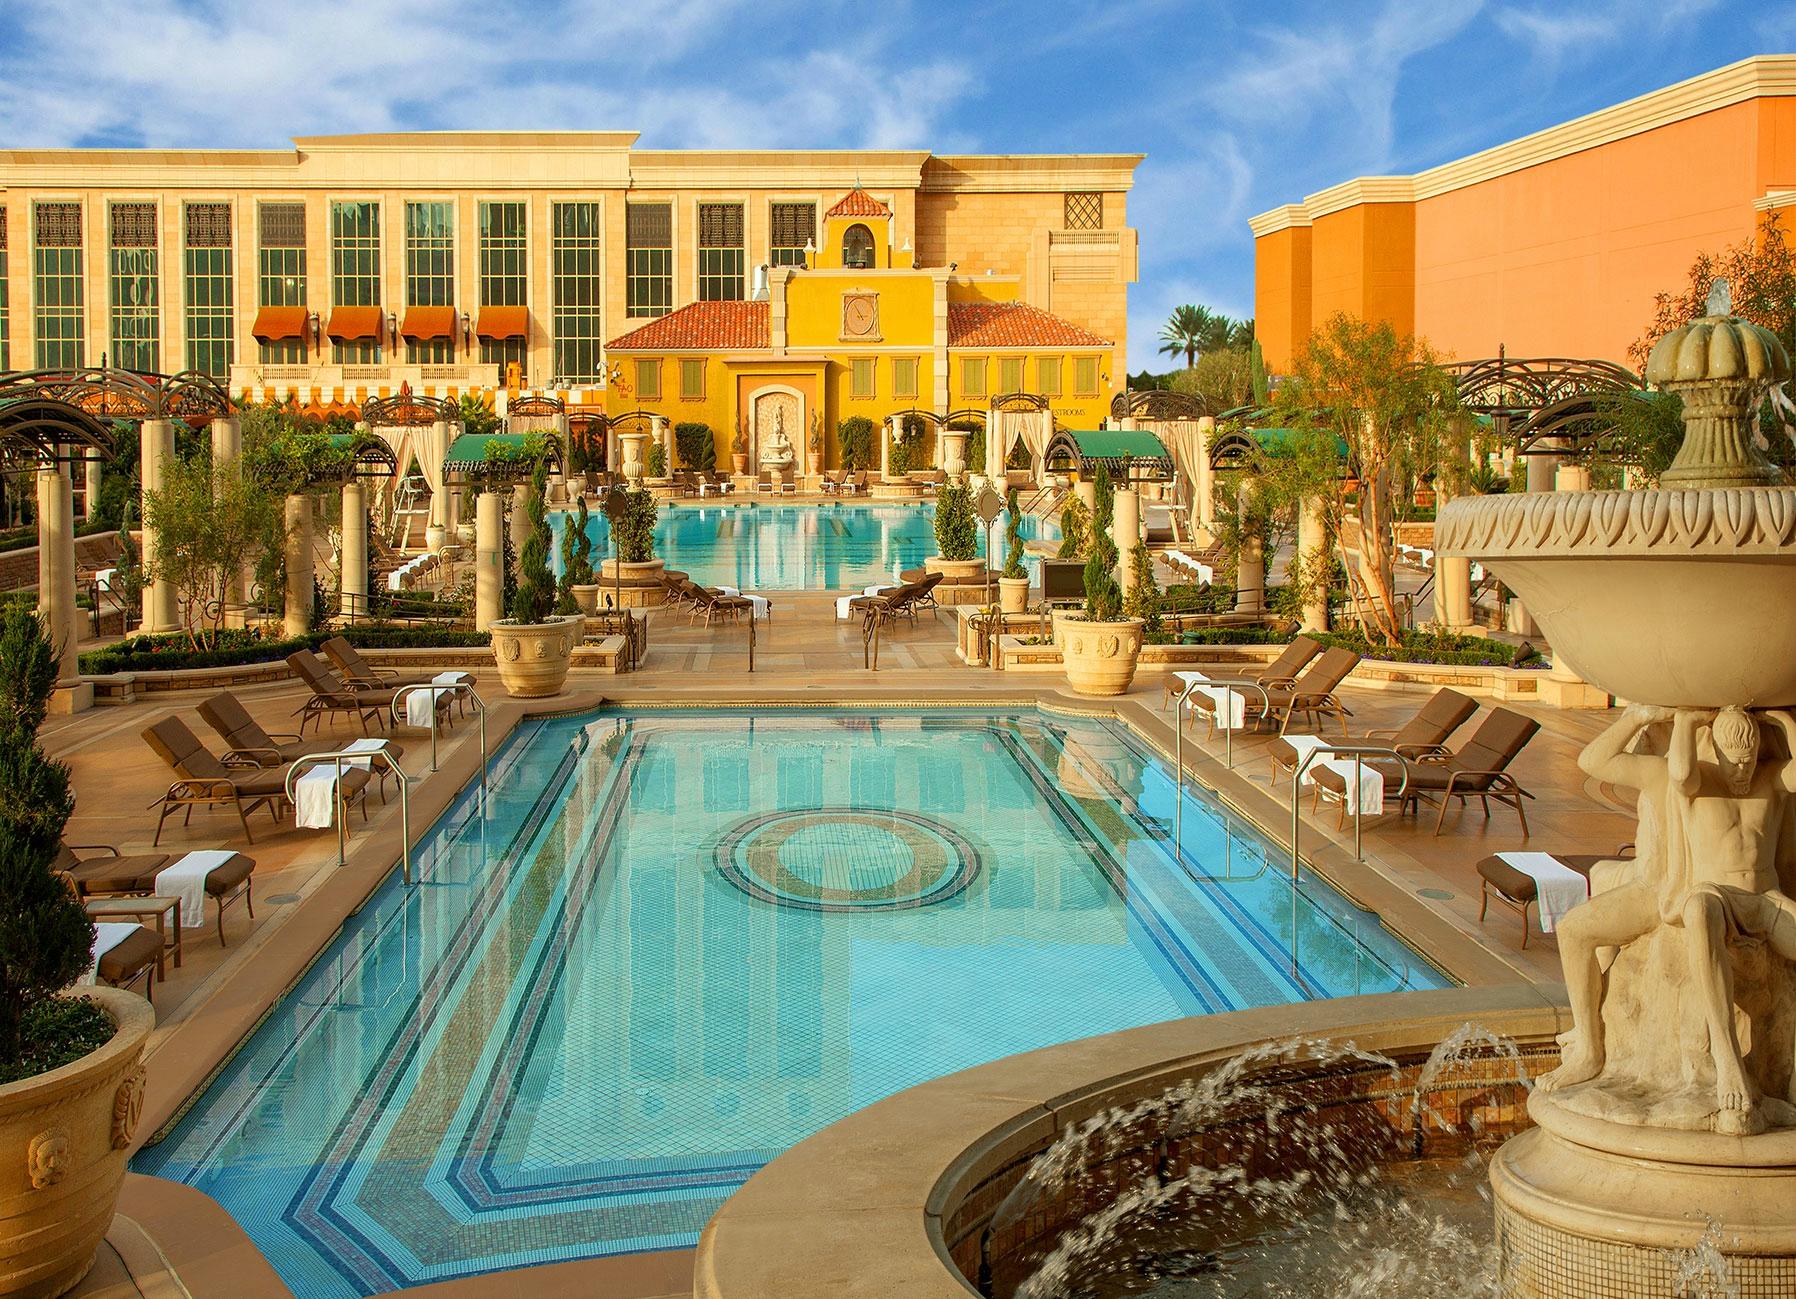 Las Vegas hotels are known for their opulence and luxury.